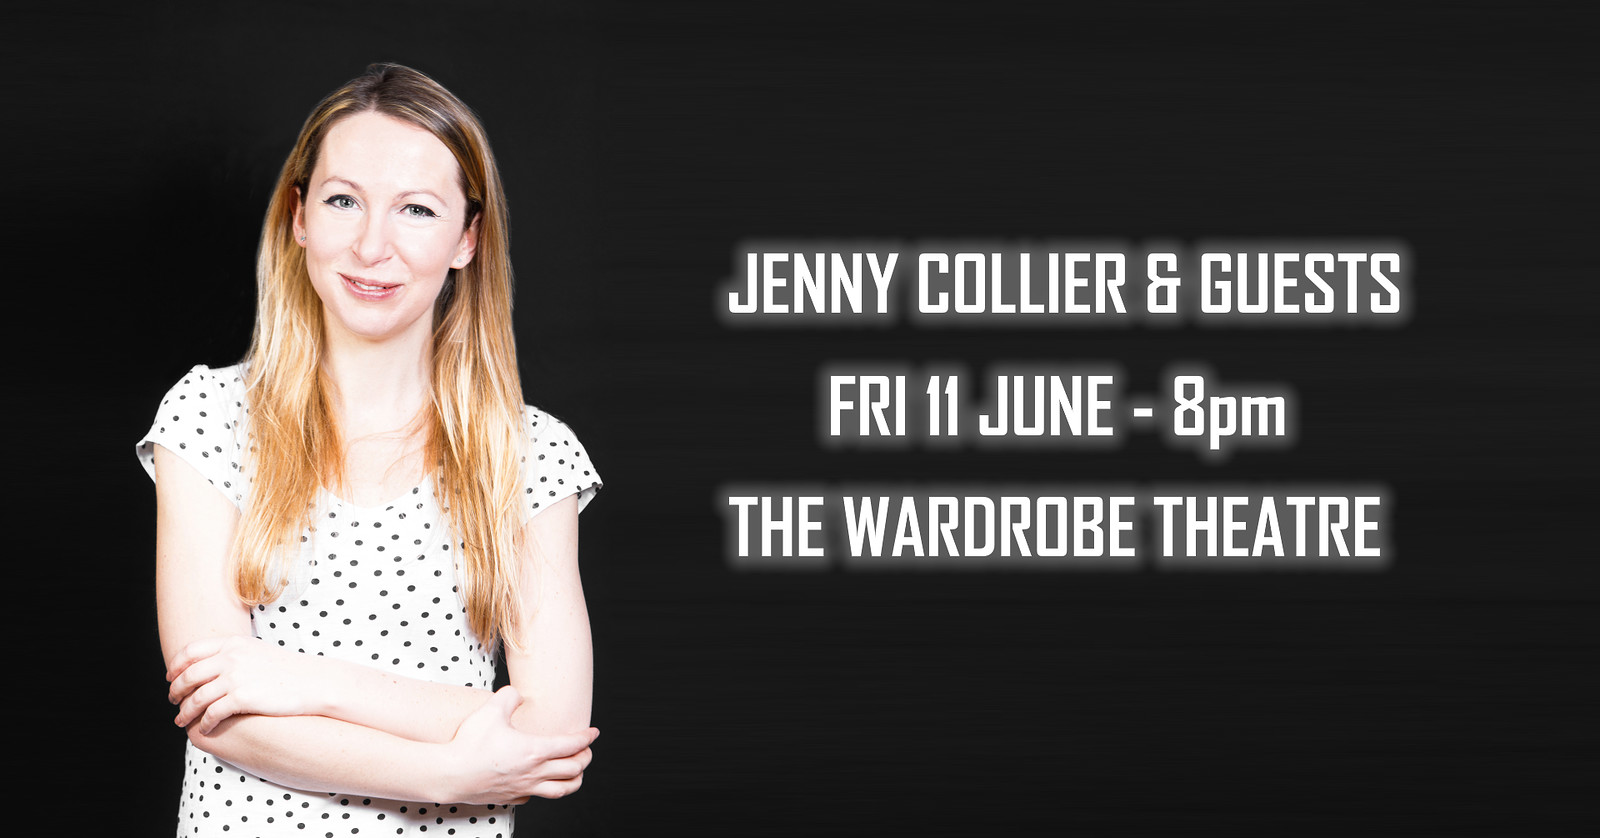 Chuckle Busters: Jenny Collier & Guests at The Wardrobe Theatre